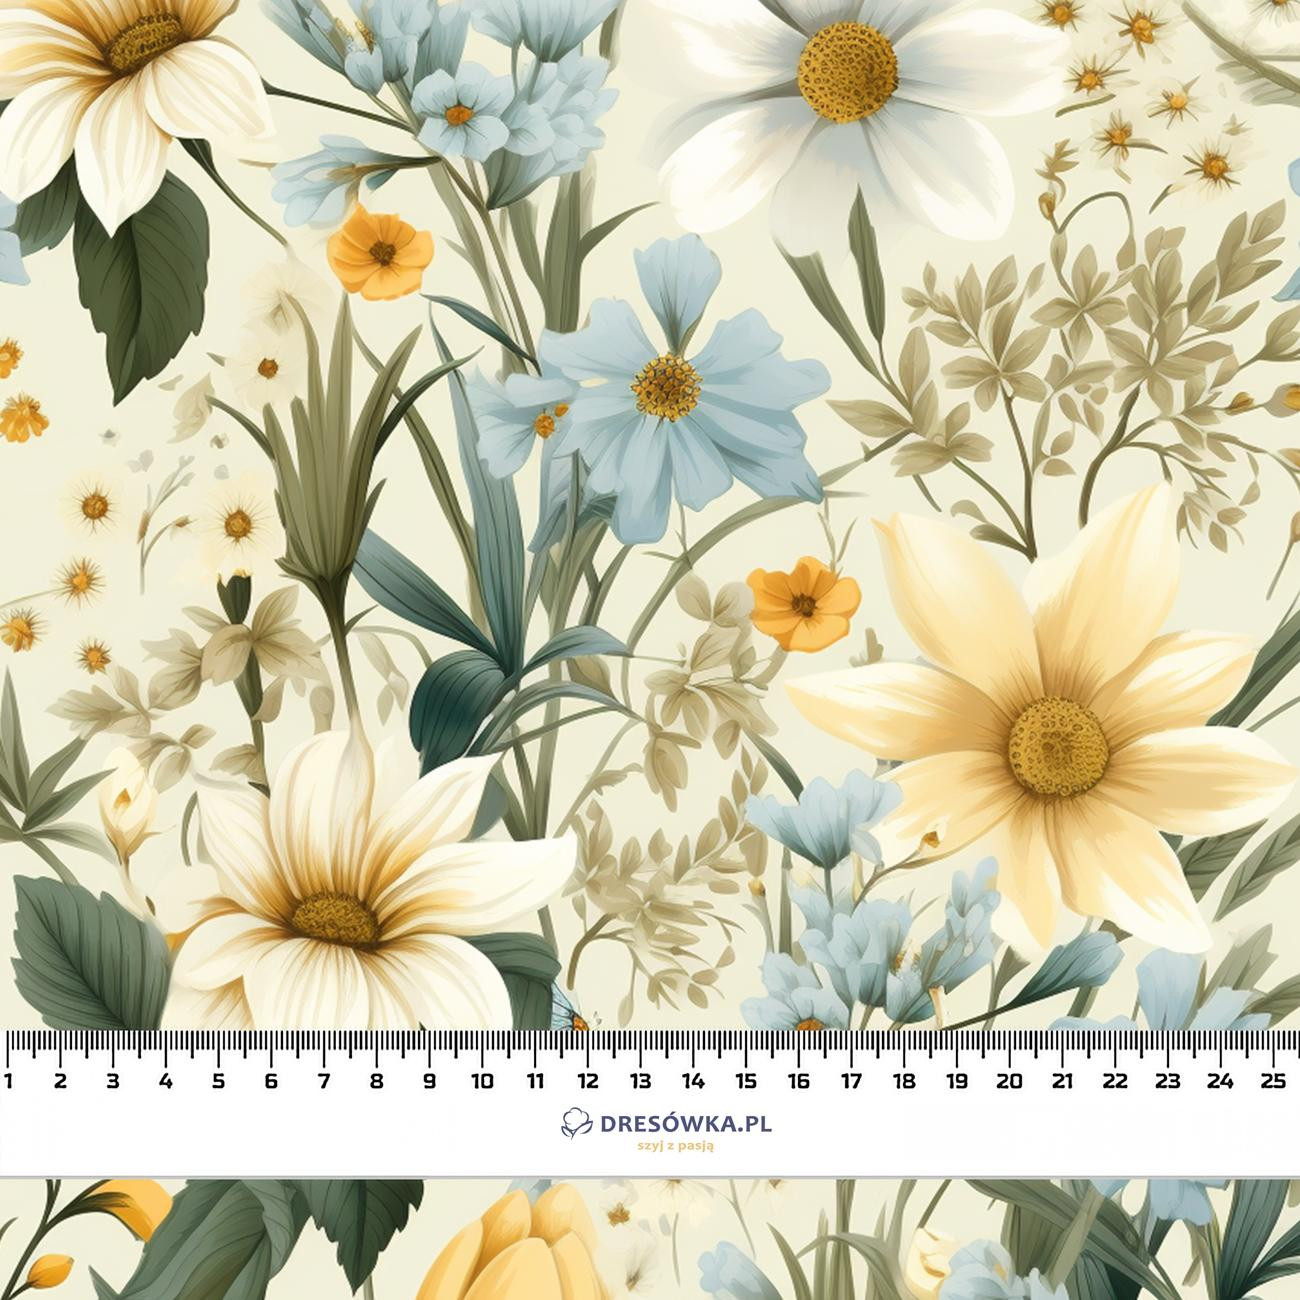 SPRING FLOWERS PAT. 3 - Cotton woven fabric